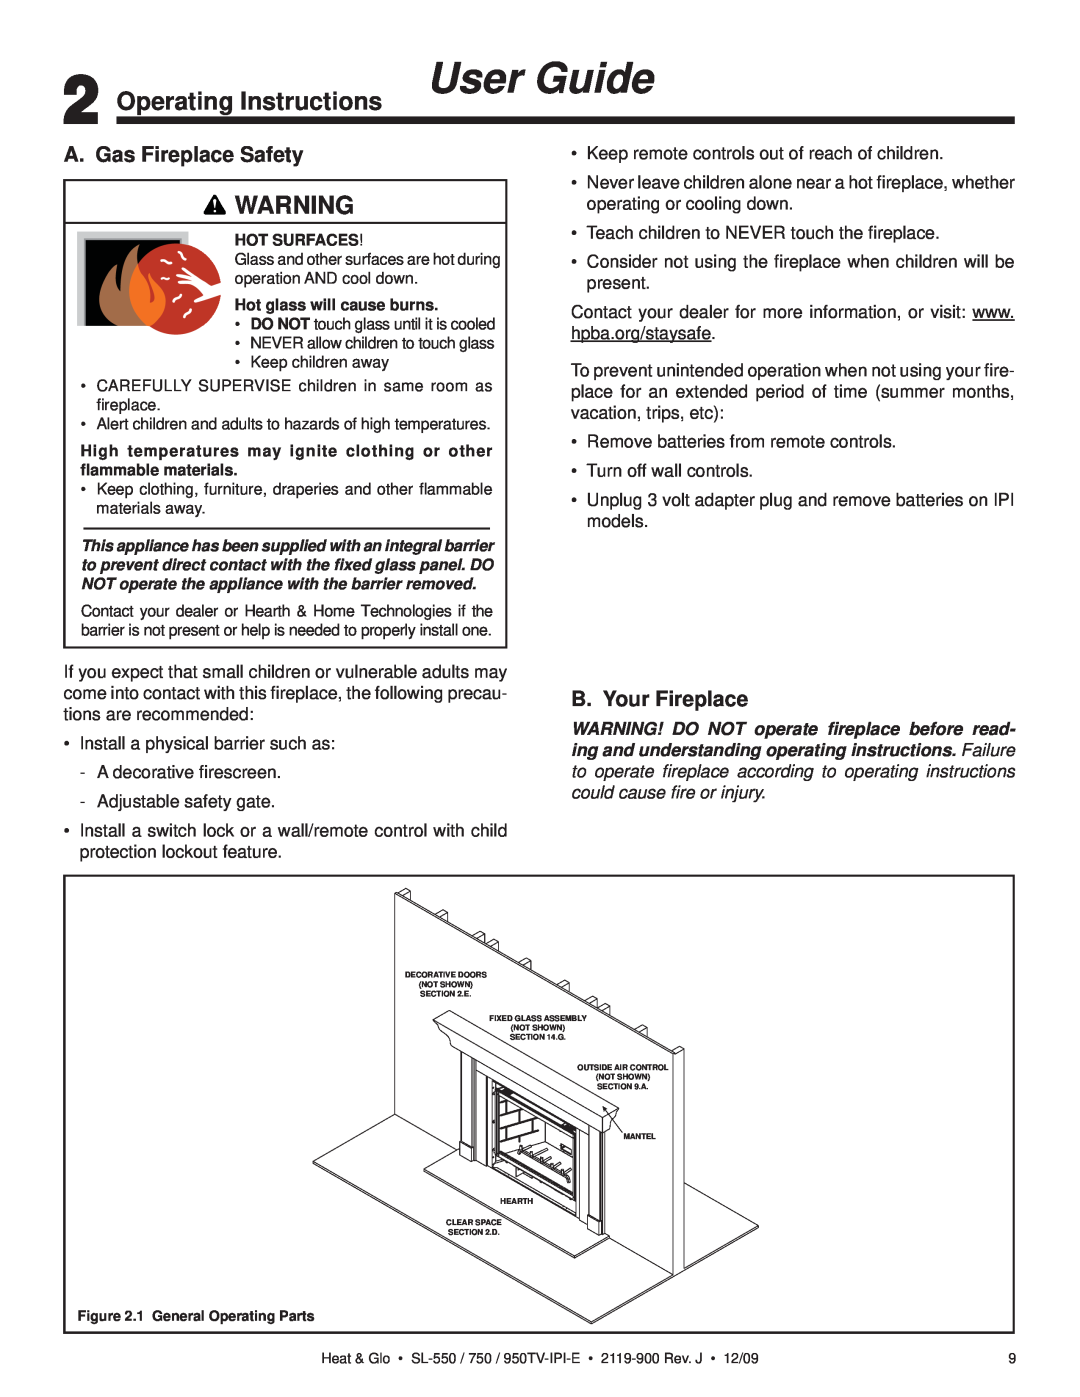 Heat & Glo LifeStyle SL-950TV-IPI-E Operating Instructions User Guide, A. Gas Fireplace Safety, B. Your Fireplace 